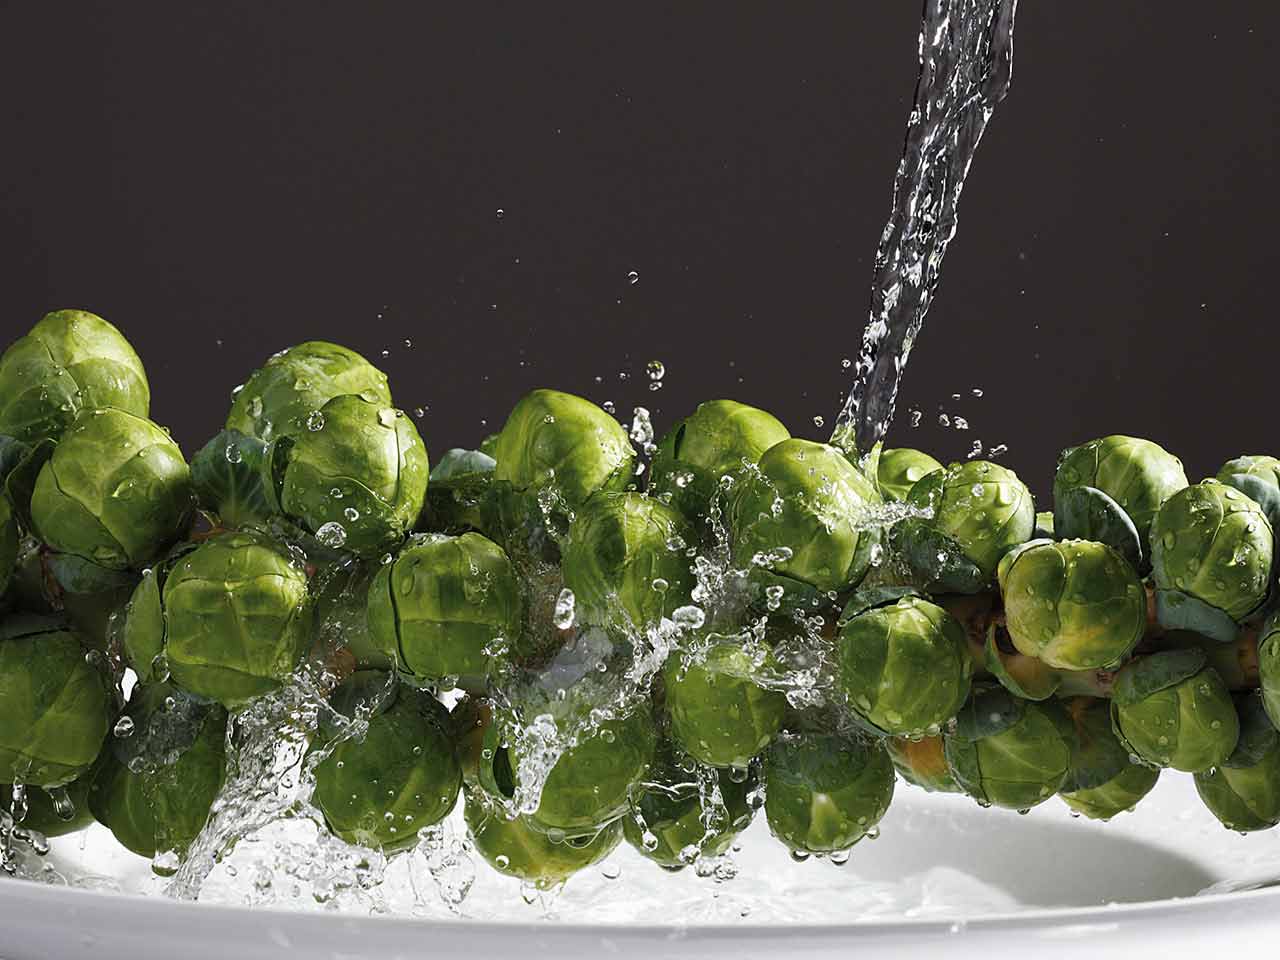 Brussel sprout stalk being rinsed